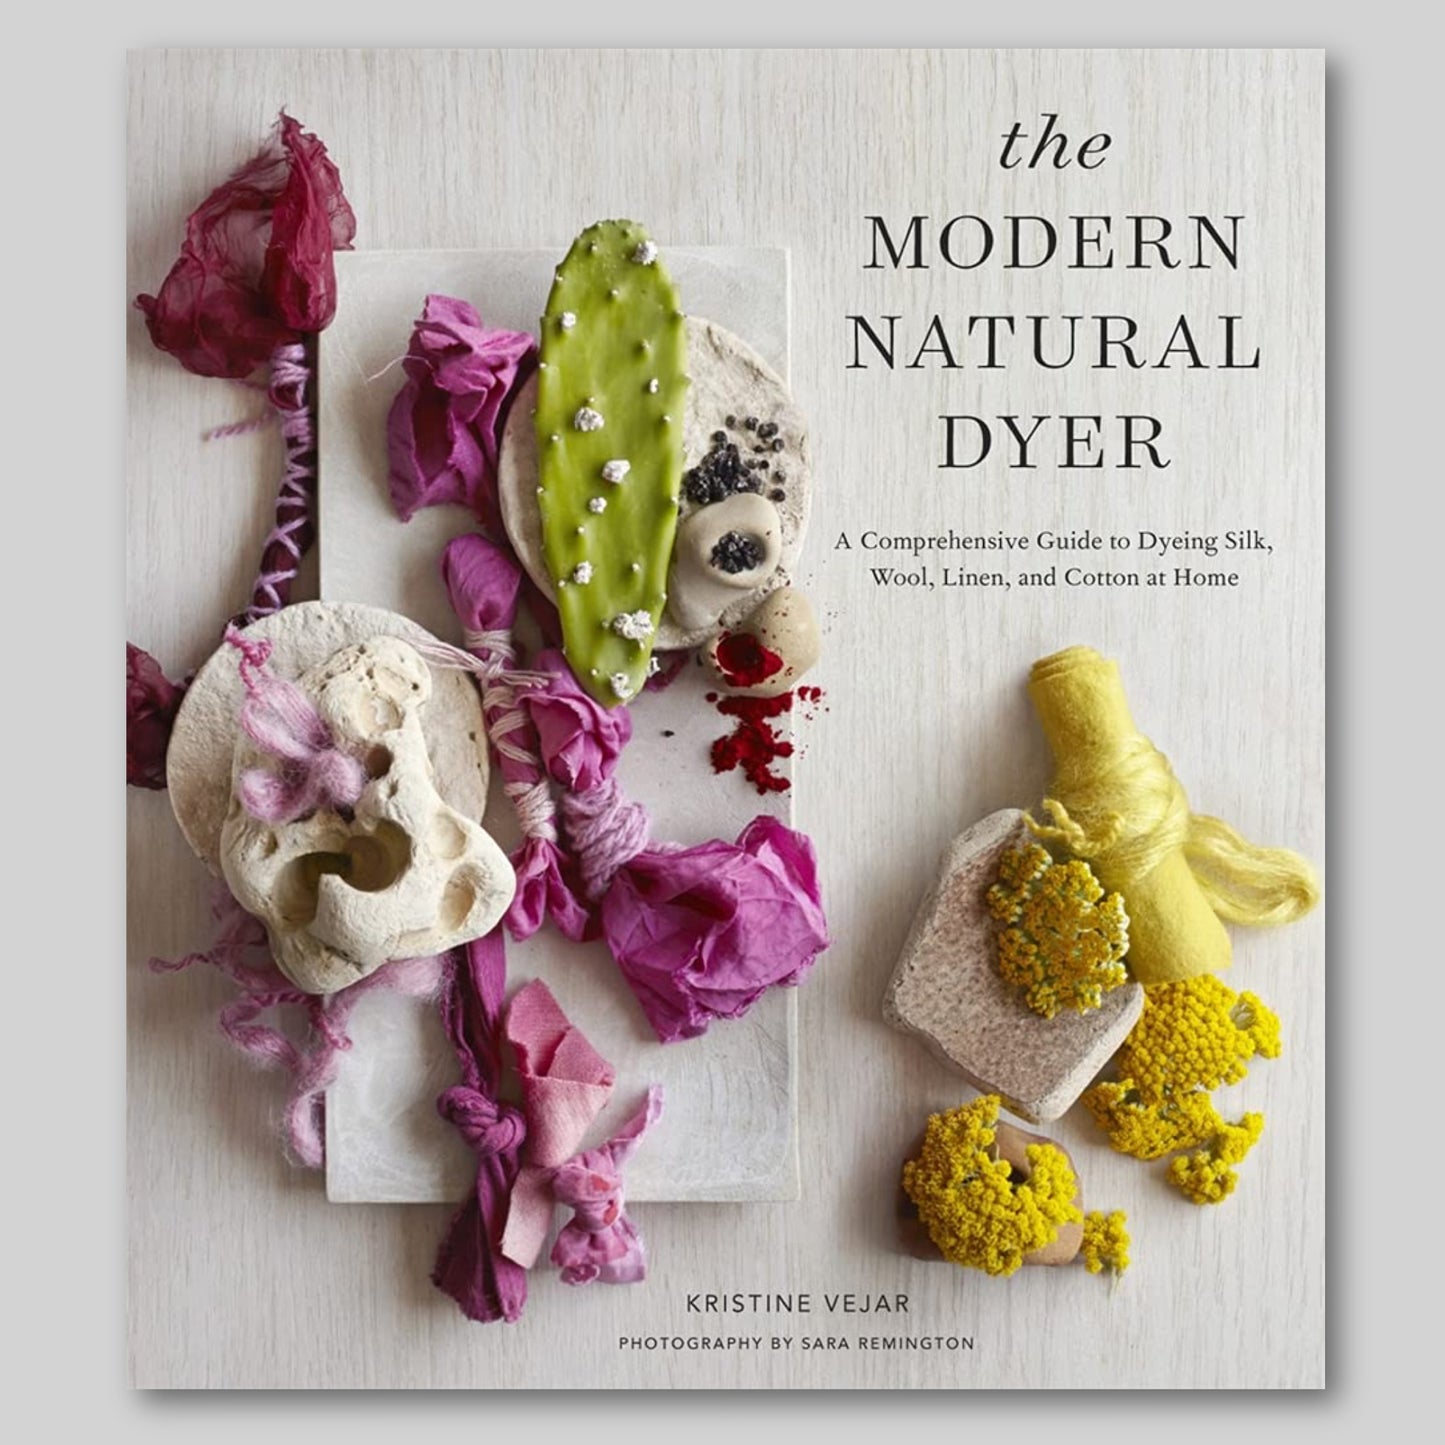 The Modern Natural Dyer